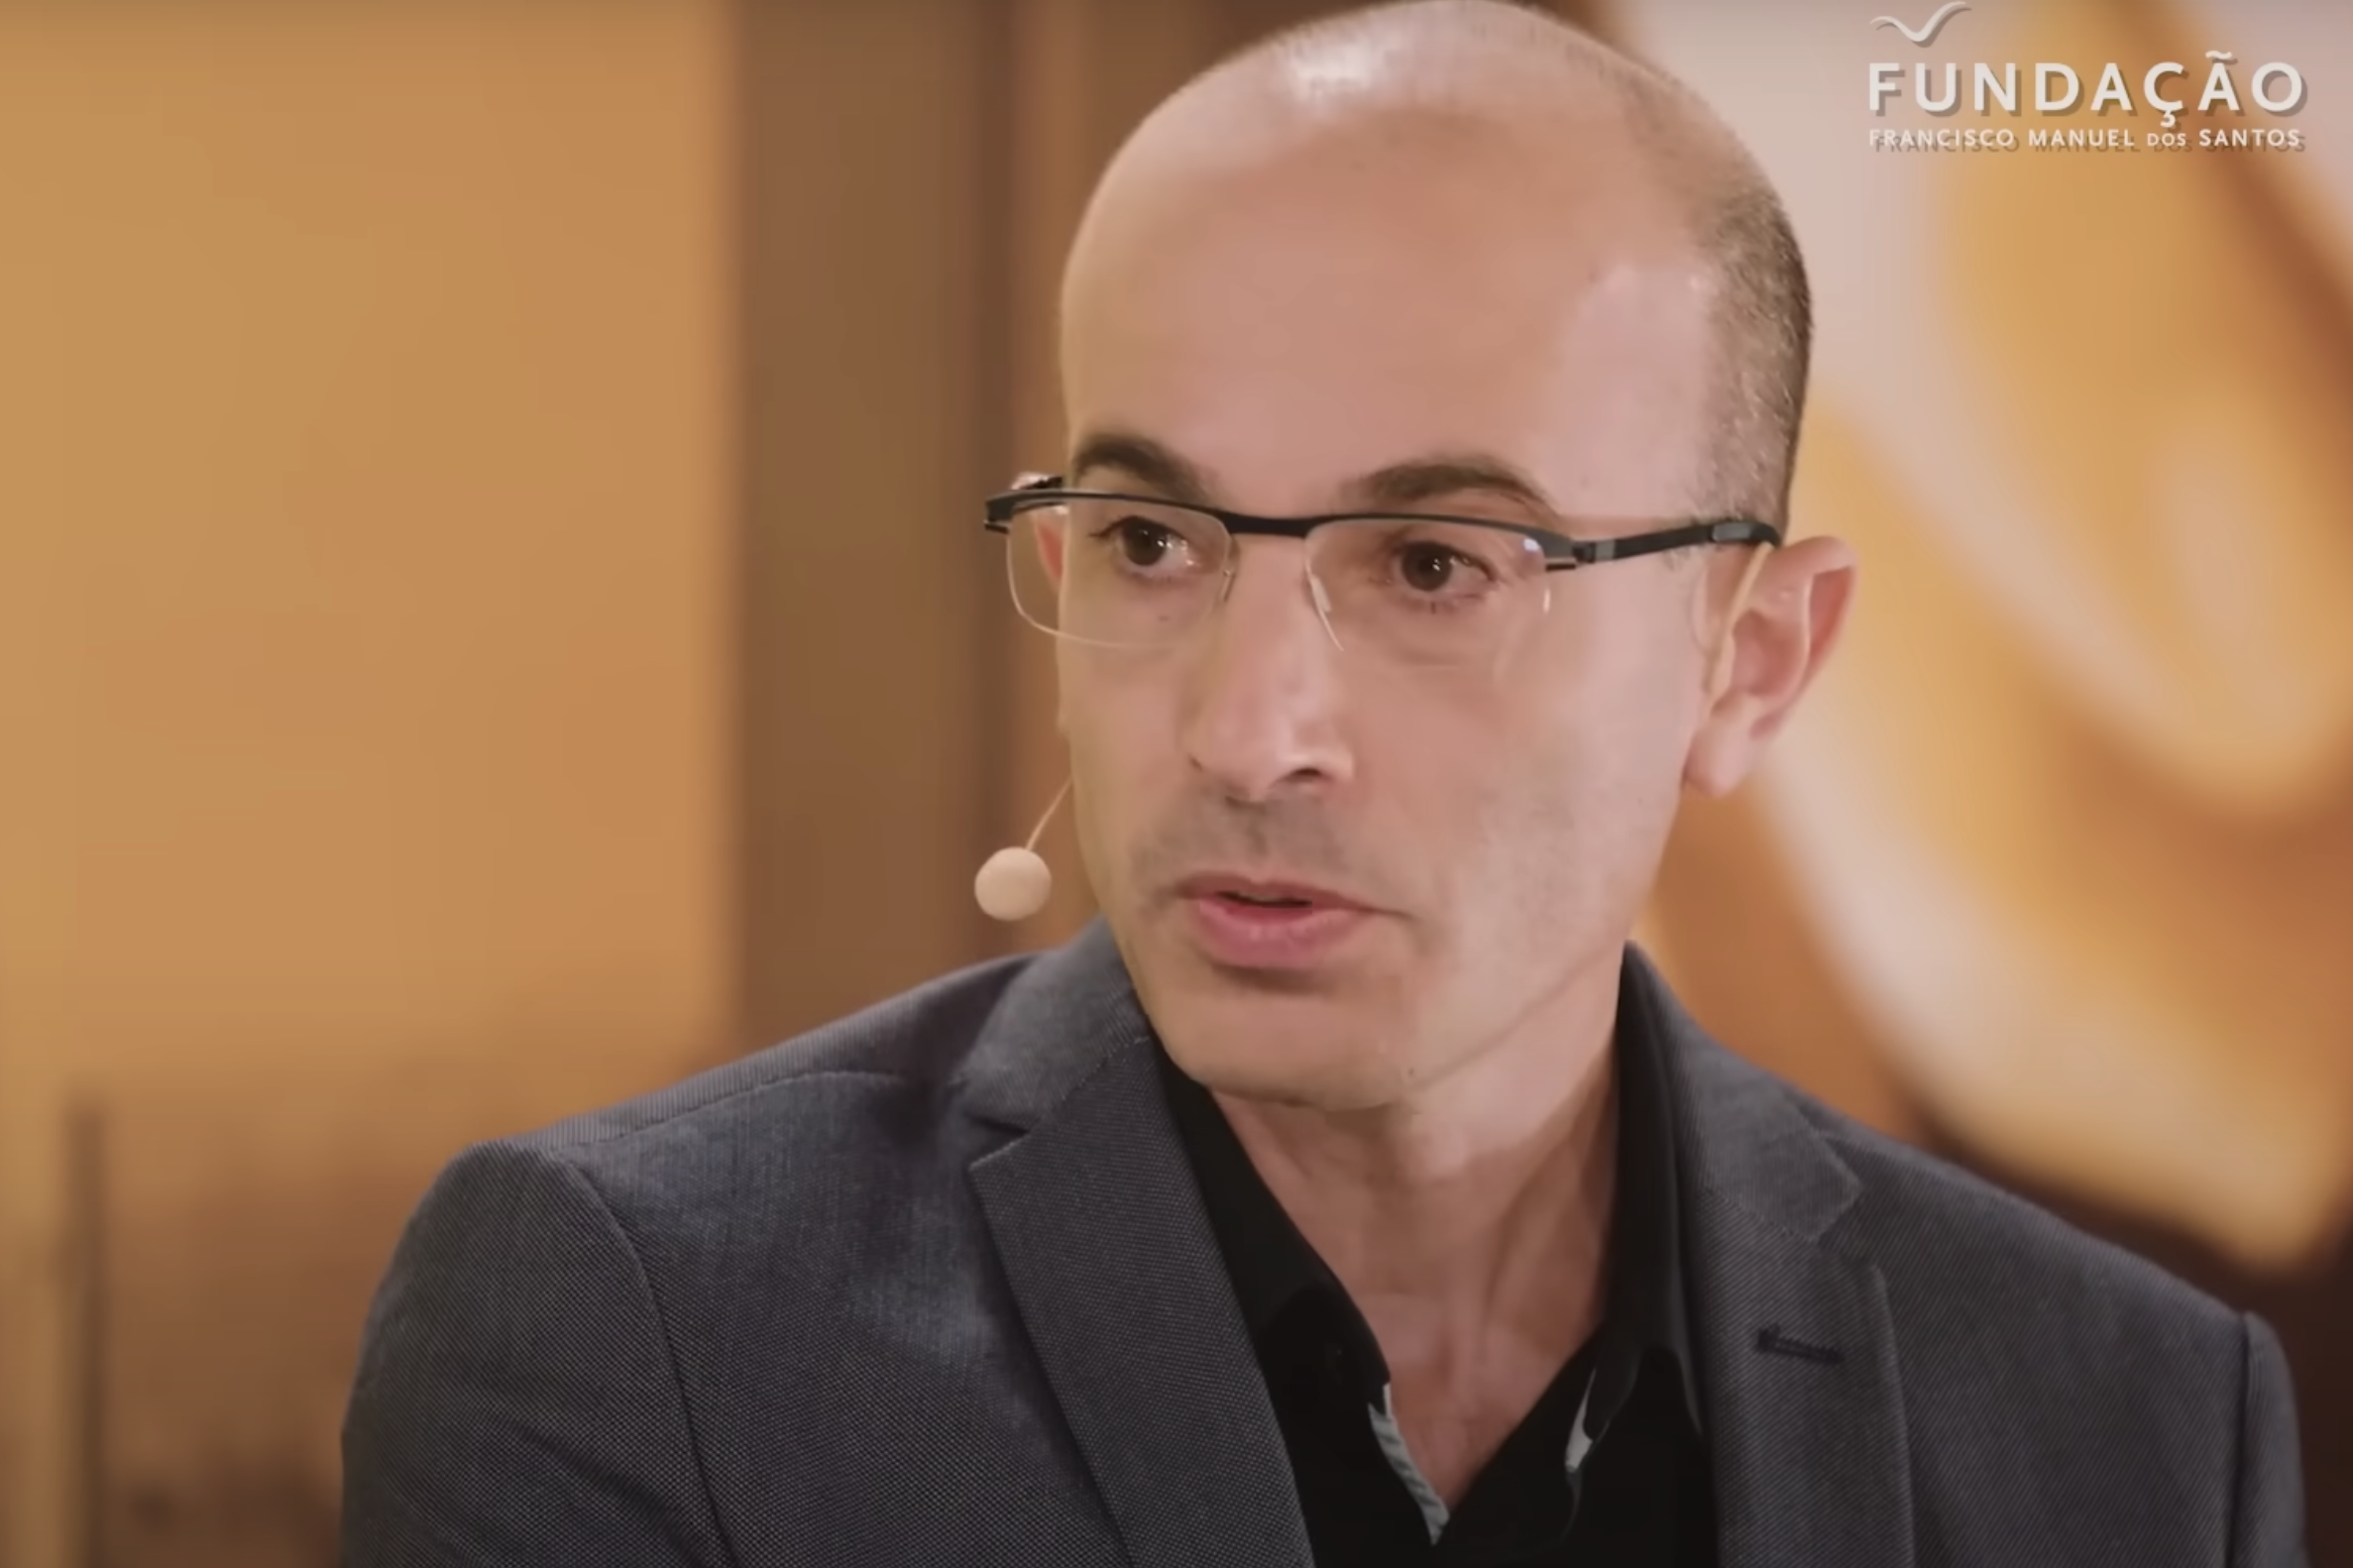 Yuval Noah Harari, a professor of history at the Hebrew University in Jerusalem and a member of the WEF, recently made a prediction about the potential of artificial intelligence (AI) to "correct religions" by rewriting the Bible